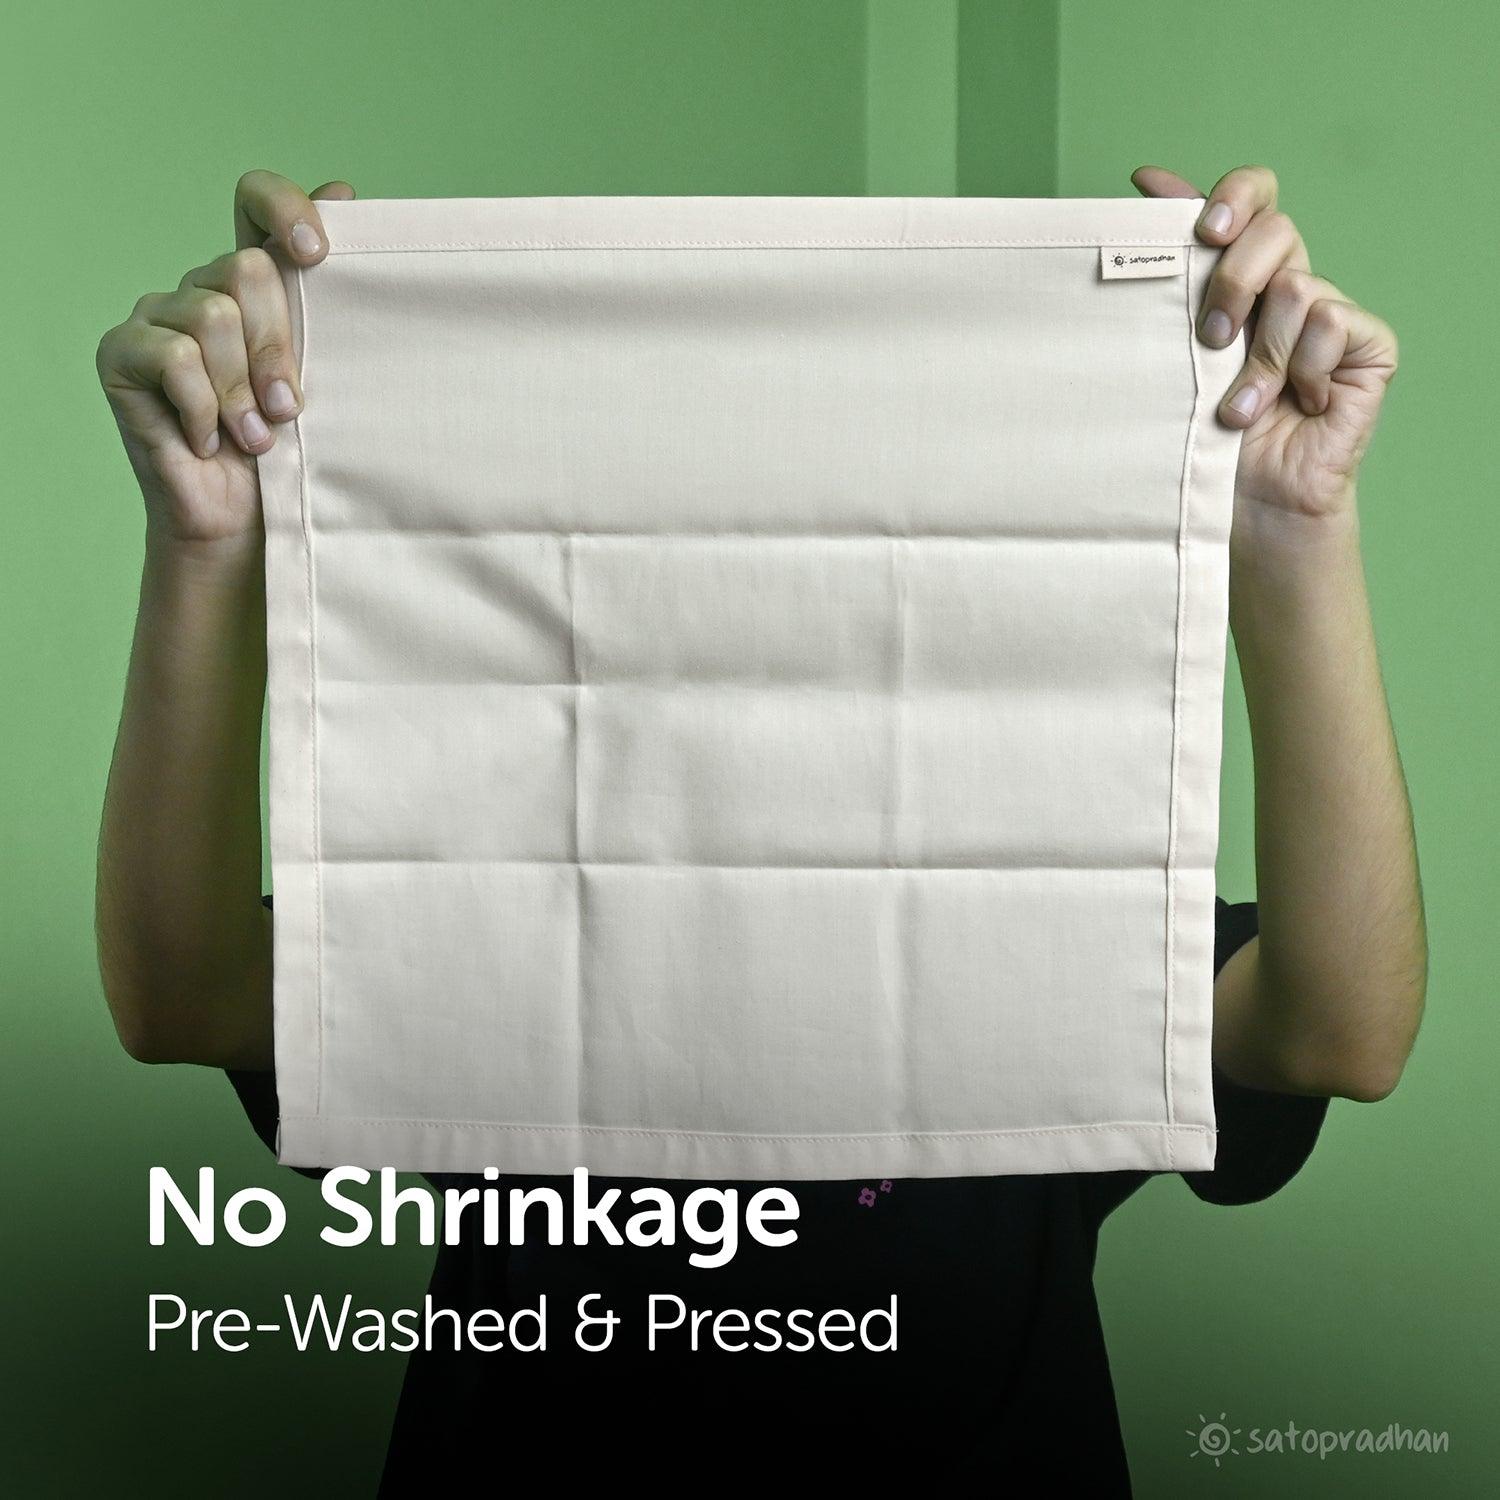 There is no issue of shrinkage in hankies even after the repeated washes